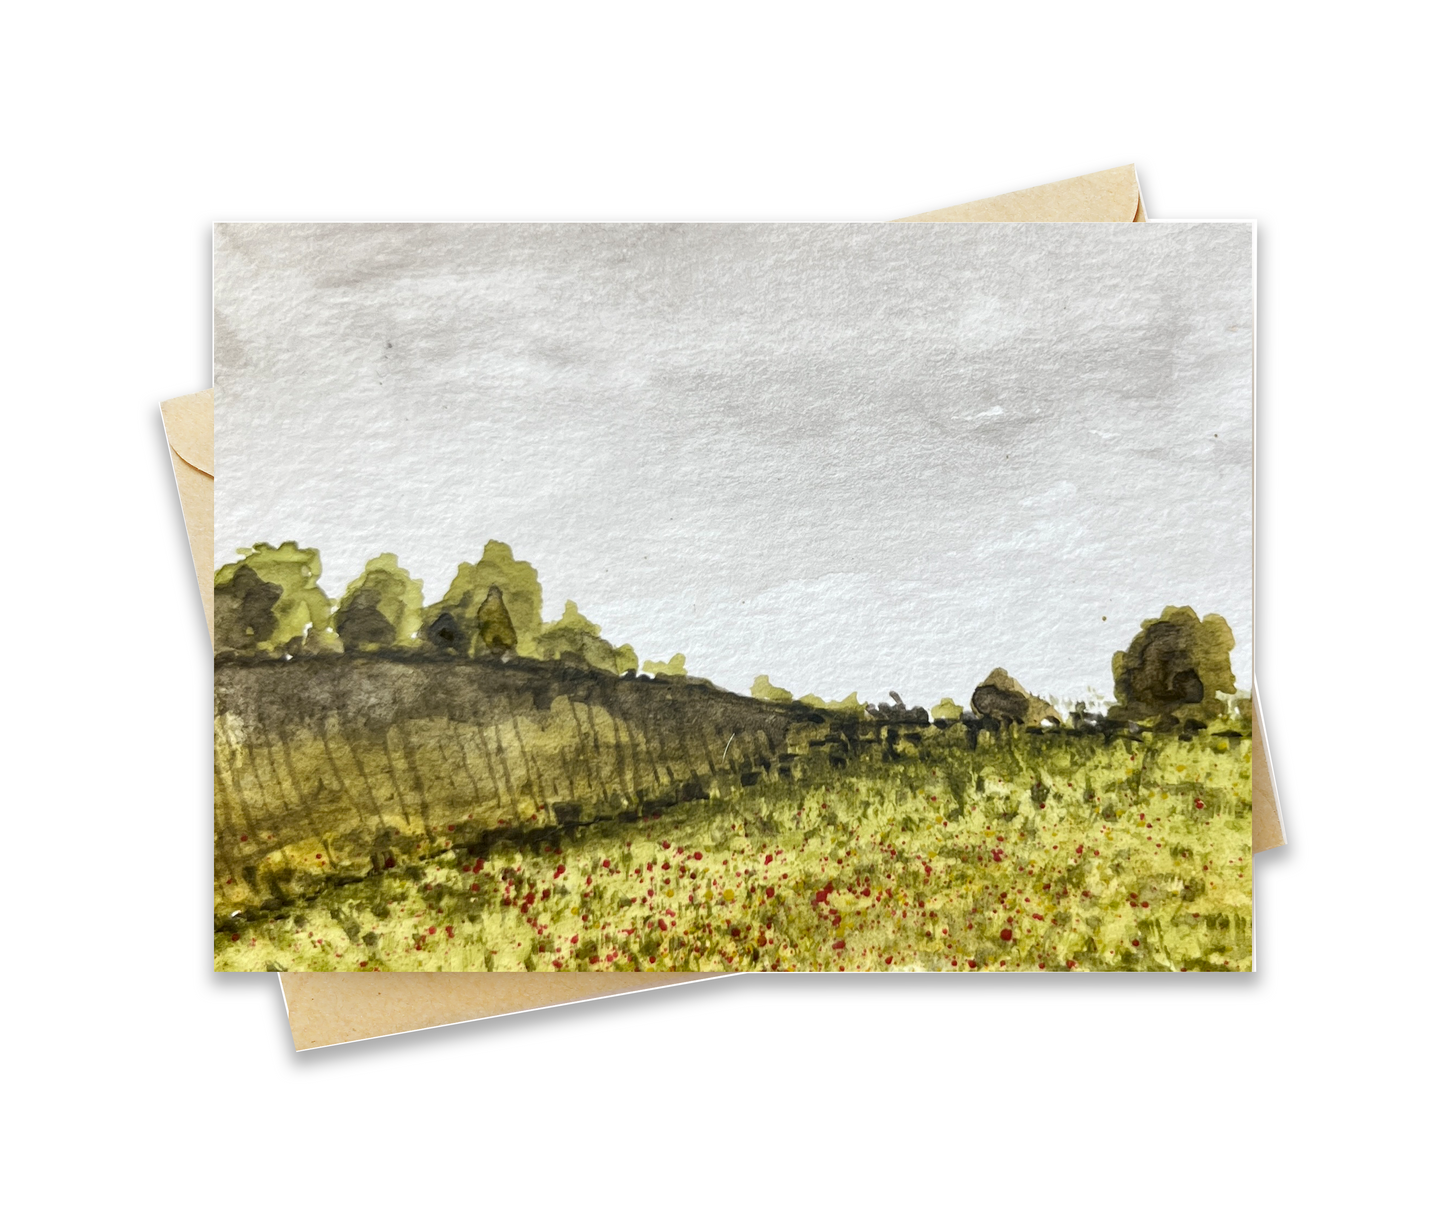 BellavanceInk: Greeting Card With Two Hills In Rural Virginia Landscape 5 x 7 Inches